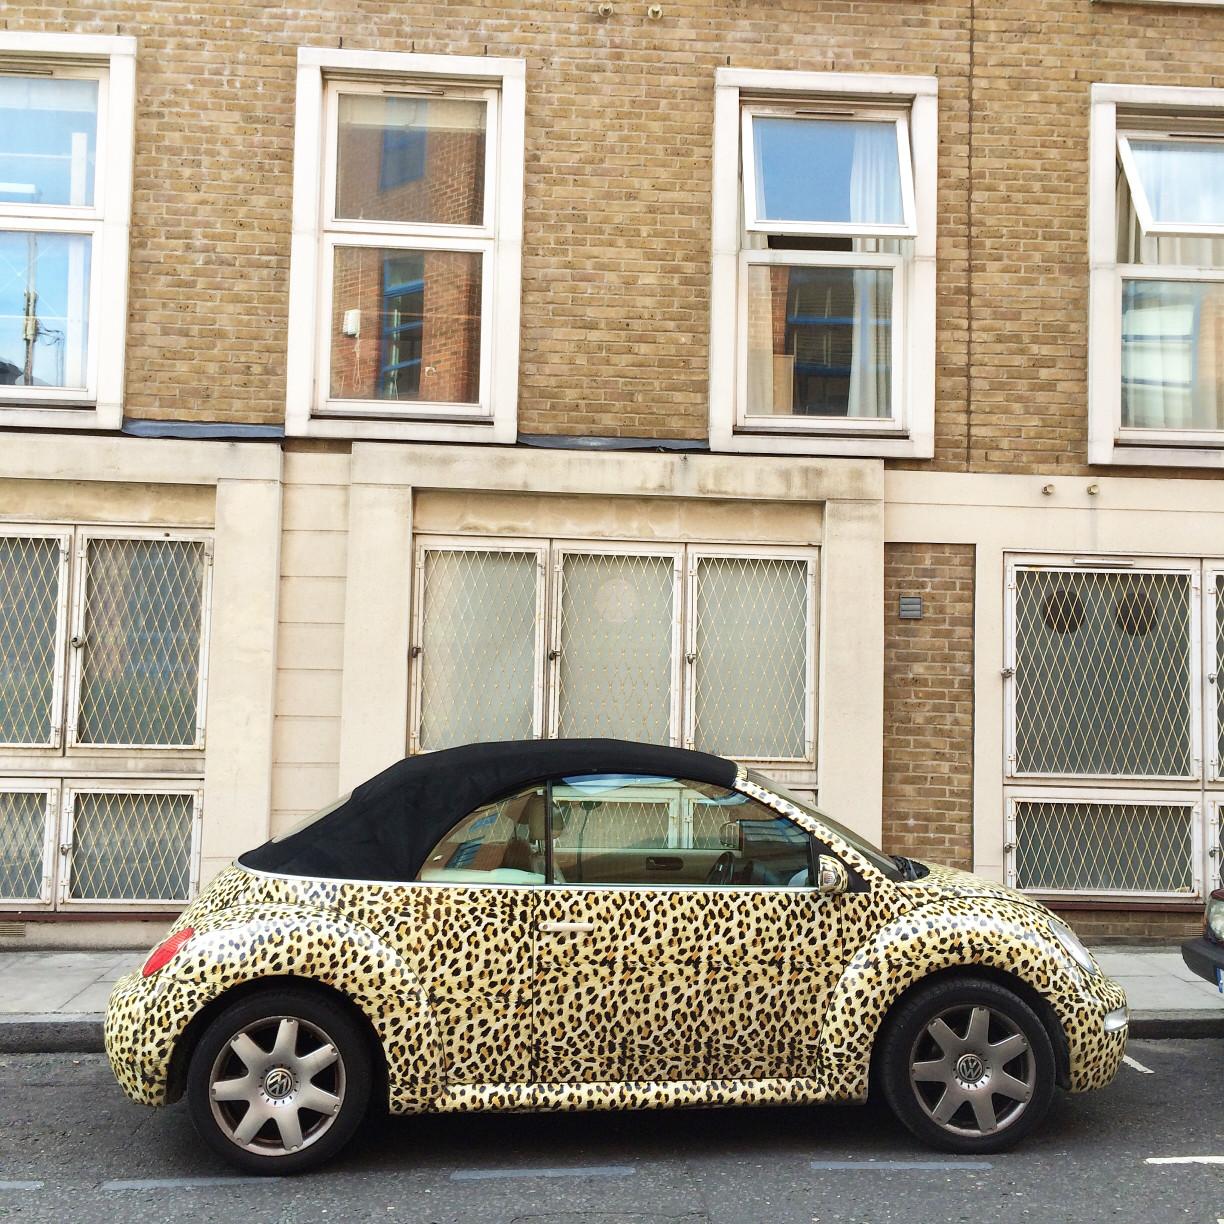 Car wrapping has become much more popular over the past few years.